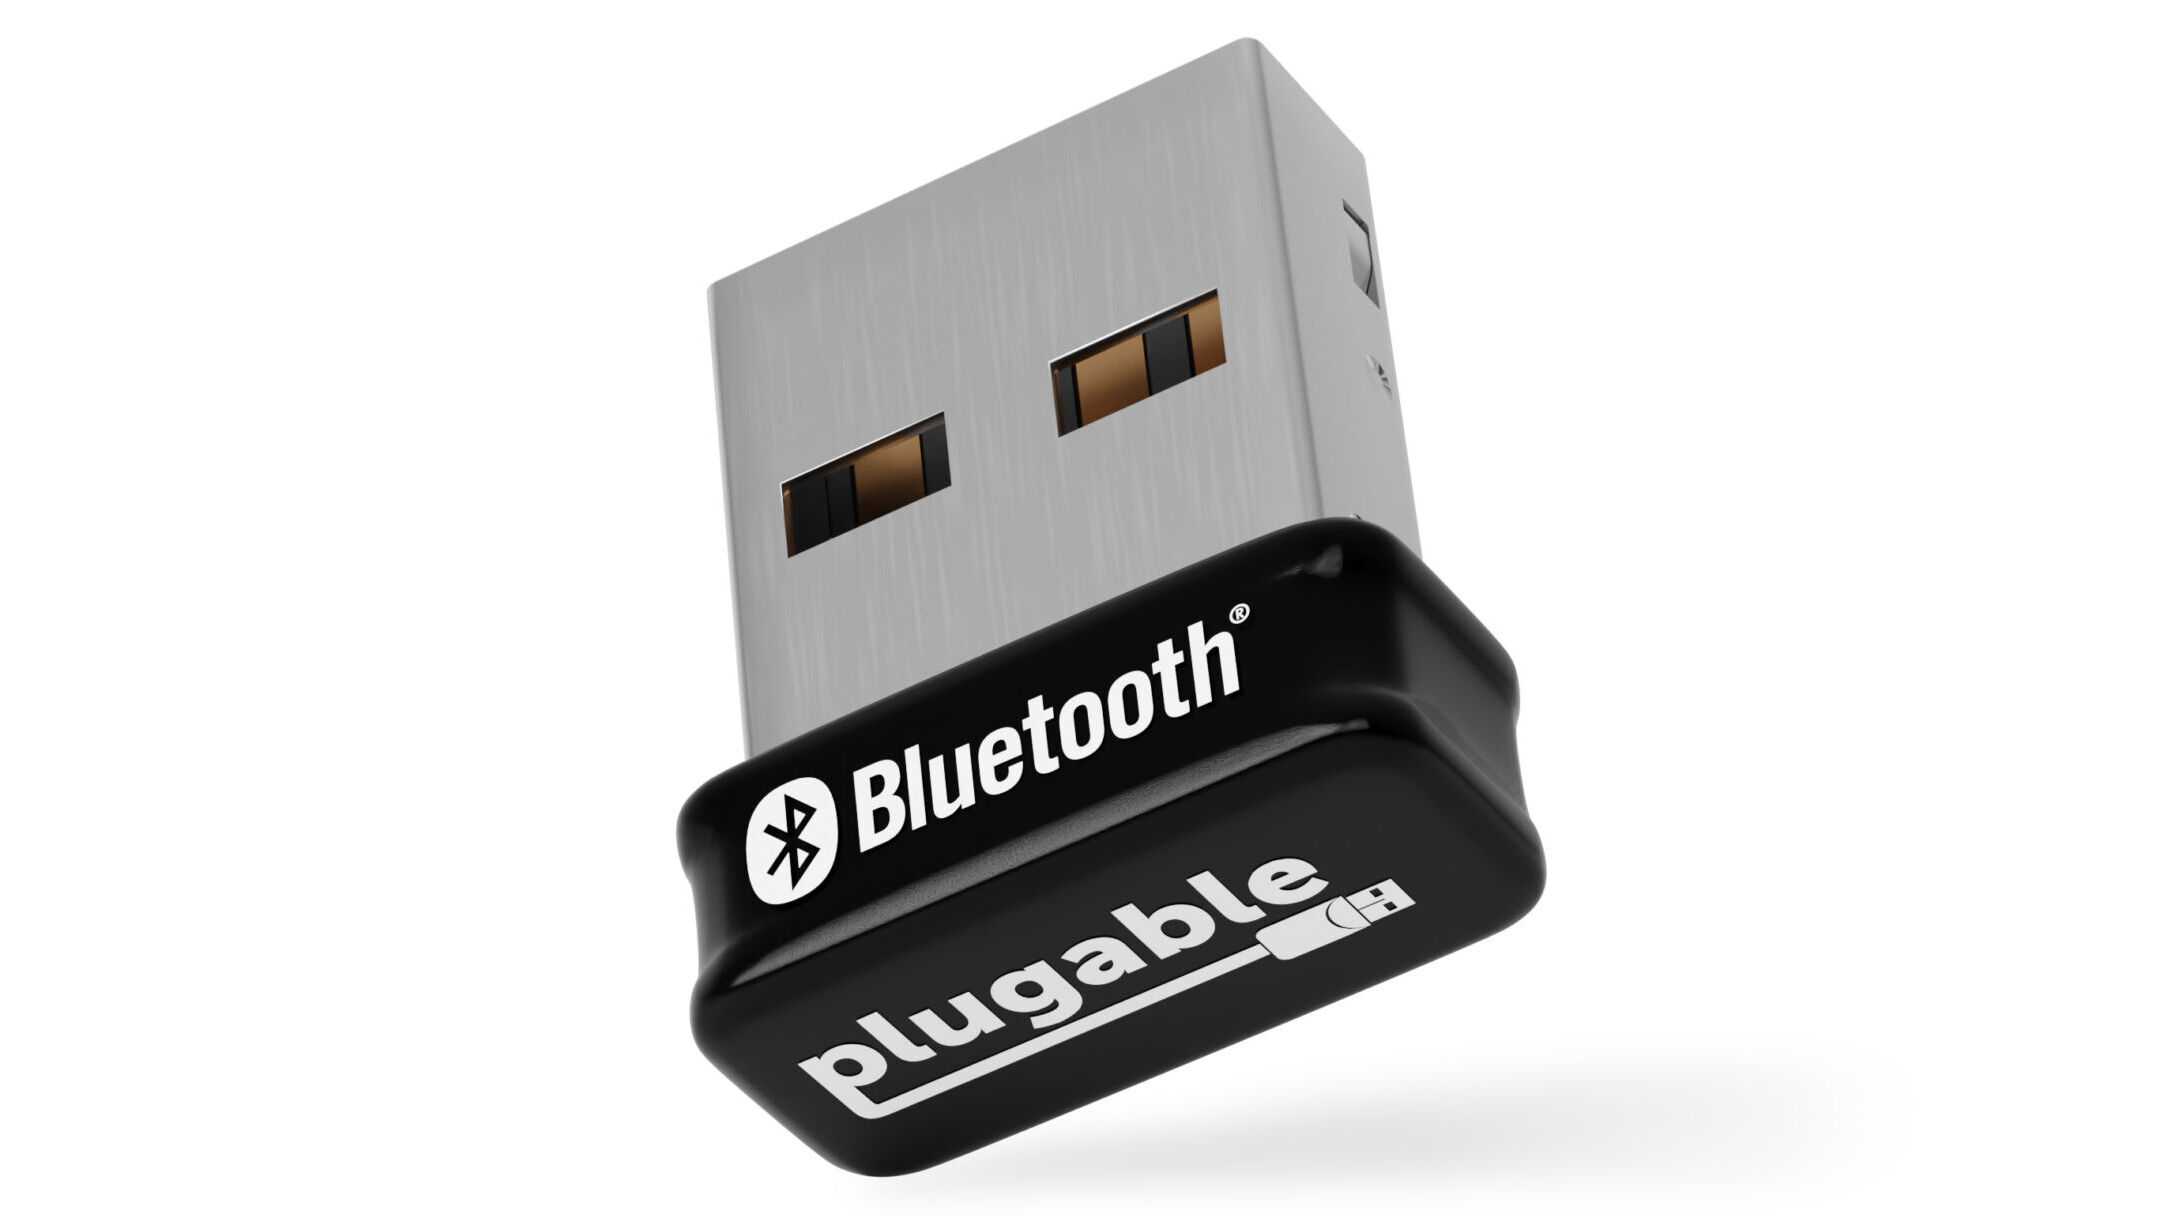 Insignia™ Bluetooth 5.0 USB Adapter for Laptops and Desktops